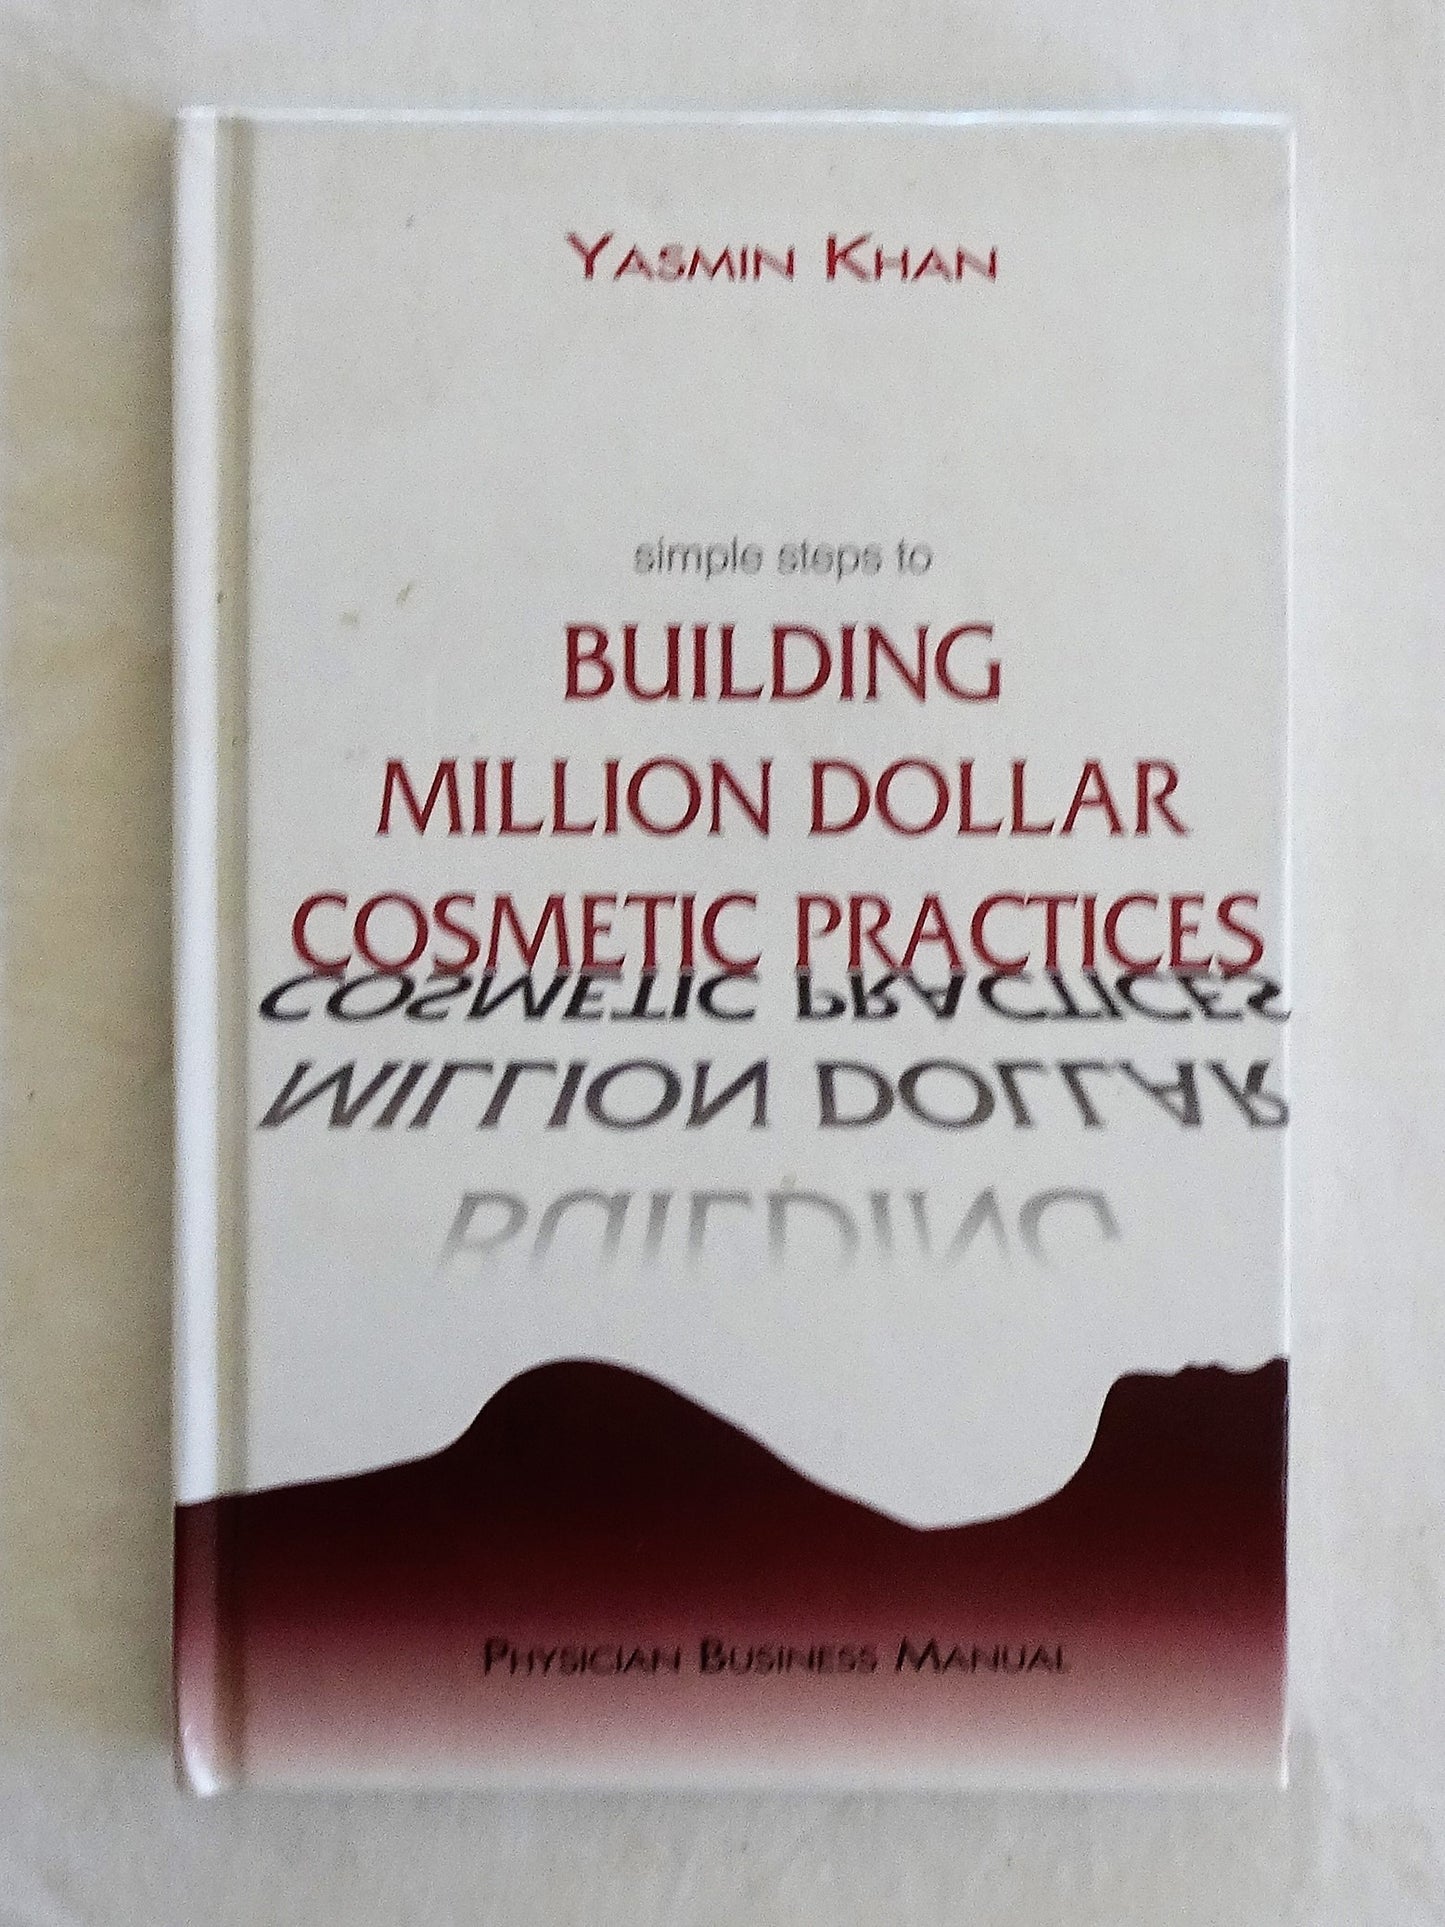 Simple Steps to Building Million Dollar Cosmetic Practices by Yasmin Khan